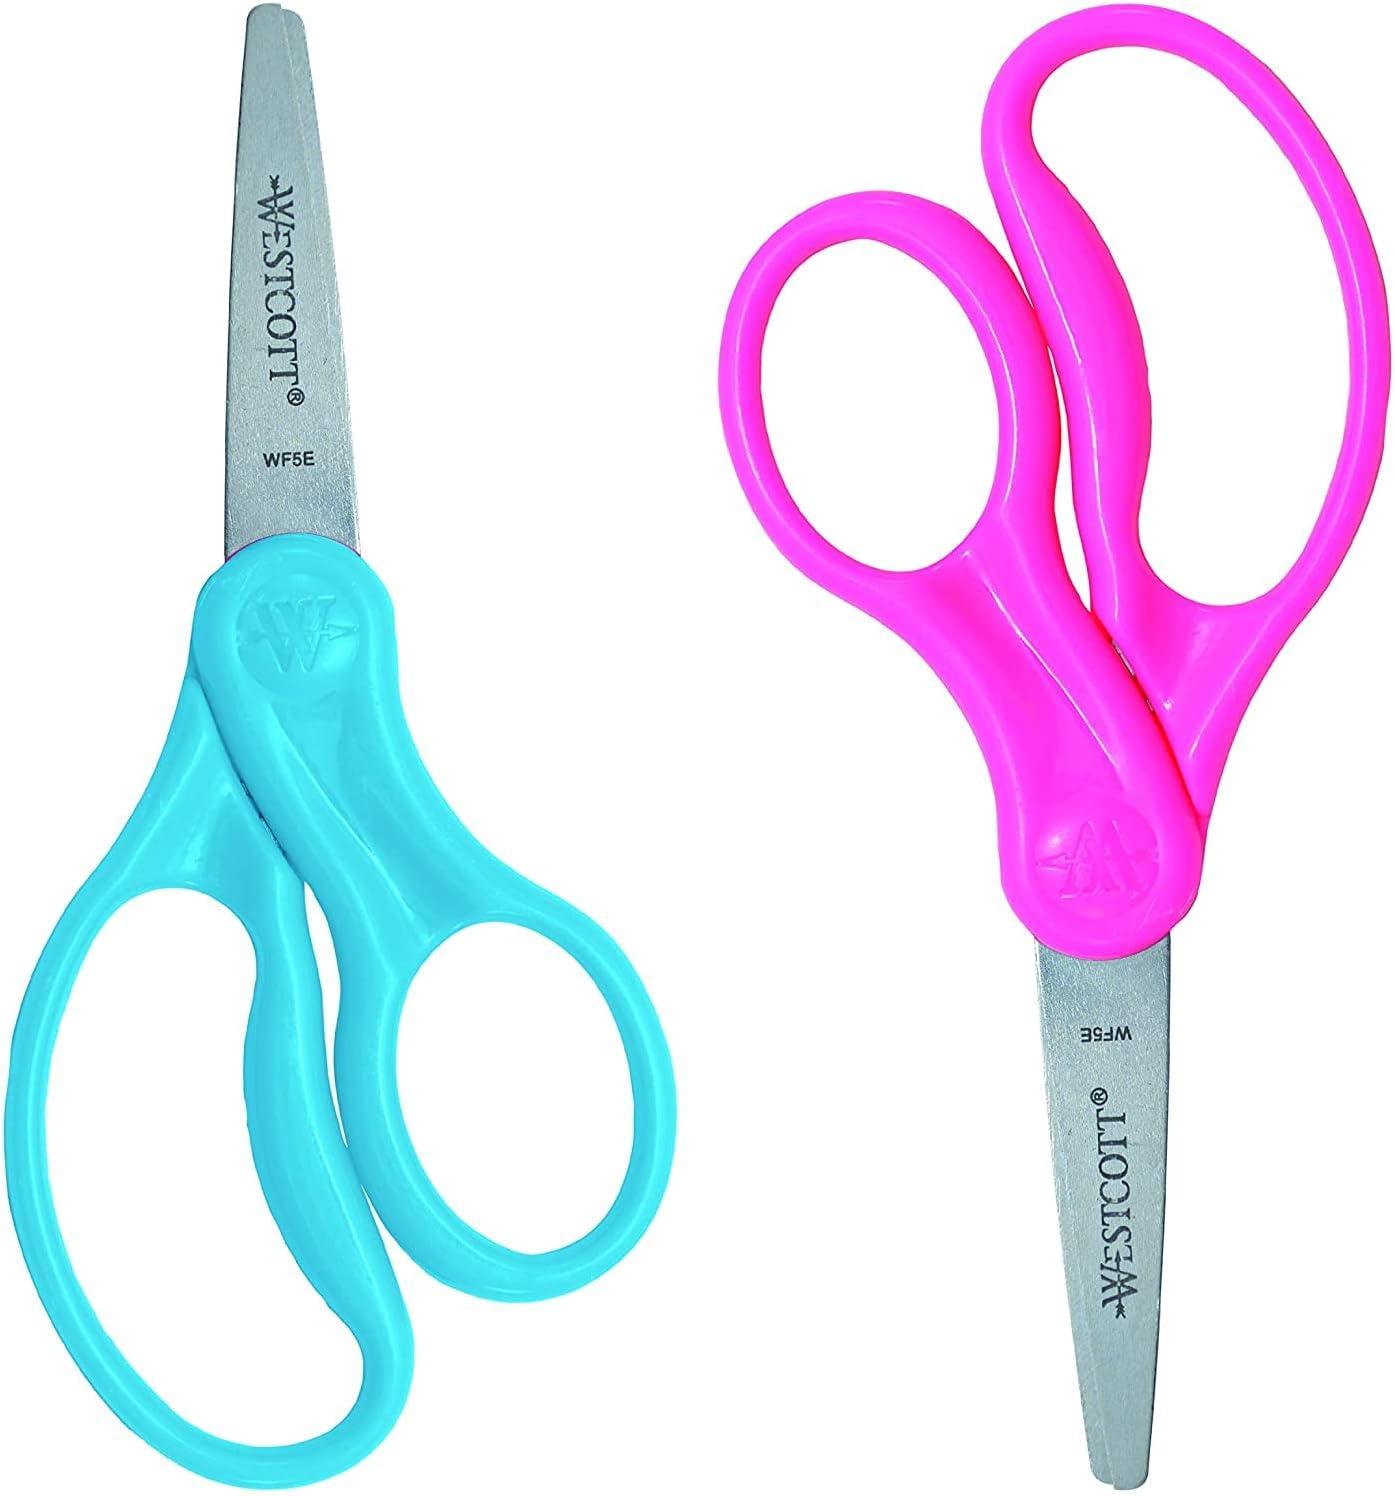 Westcott 13130 Right- and Left-Handed Scissors, Kids' Scissors, Ages 4-8,  5-Inch Blunt Tip, Assorted